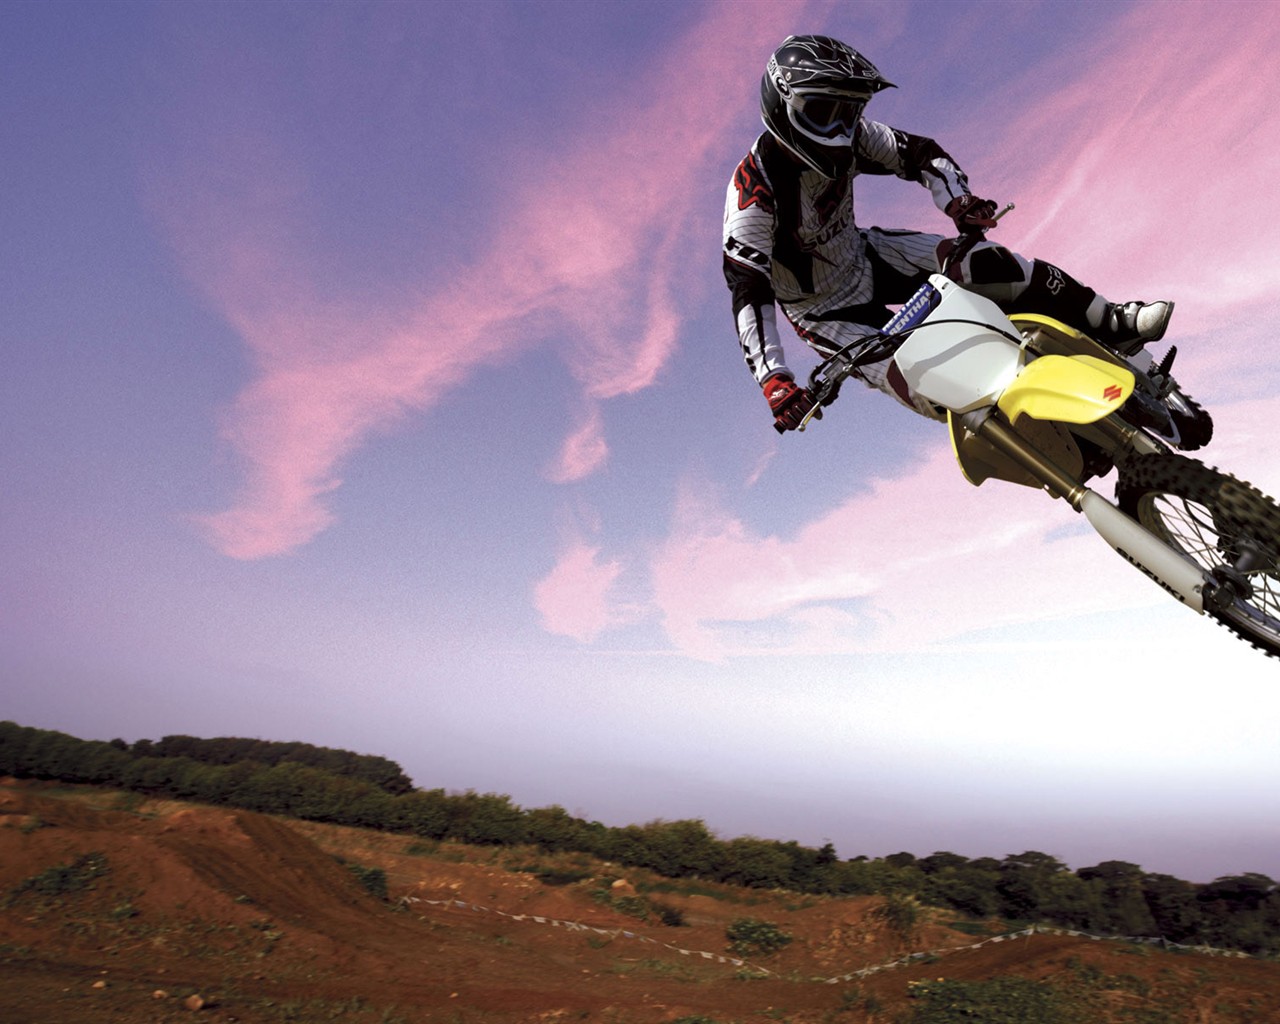 Motocyclettes hors route HD Wallpaper (2) #40 - 1280x1024